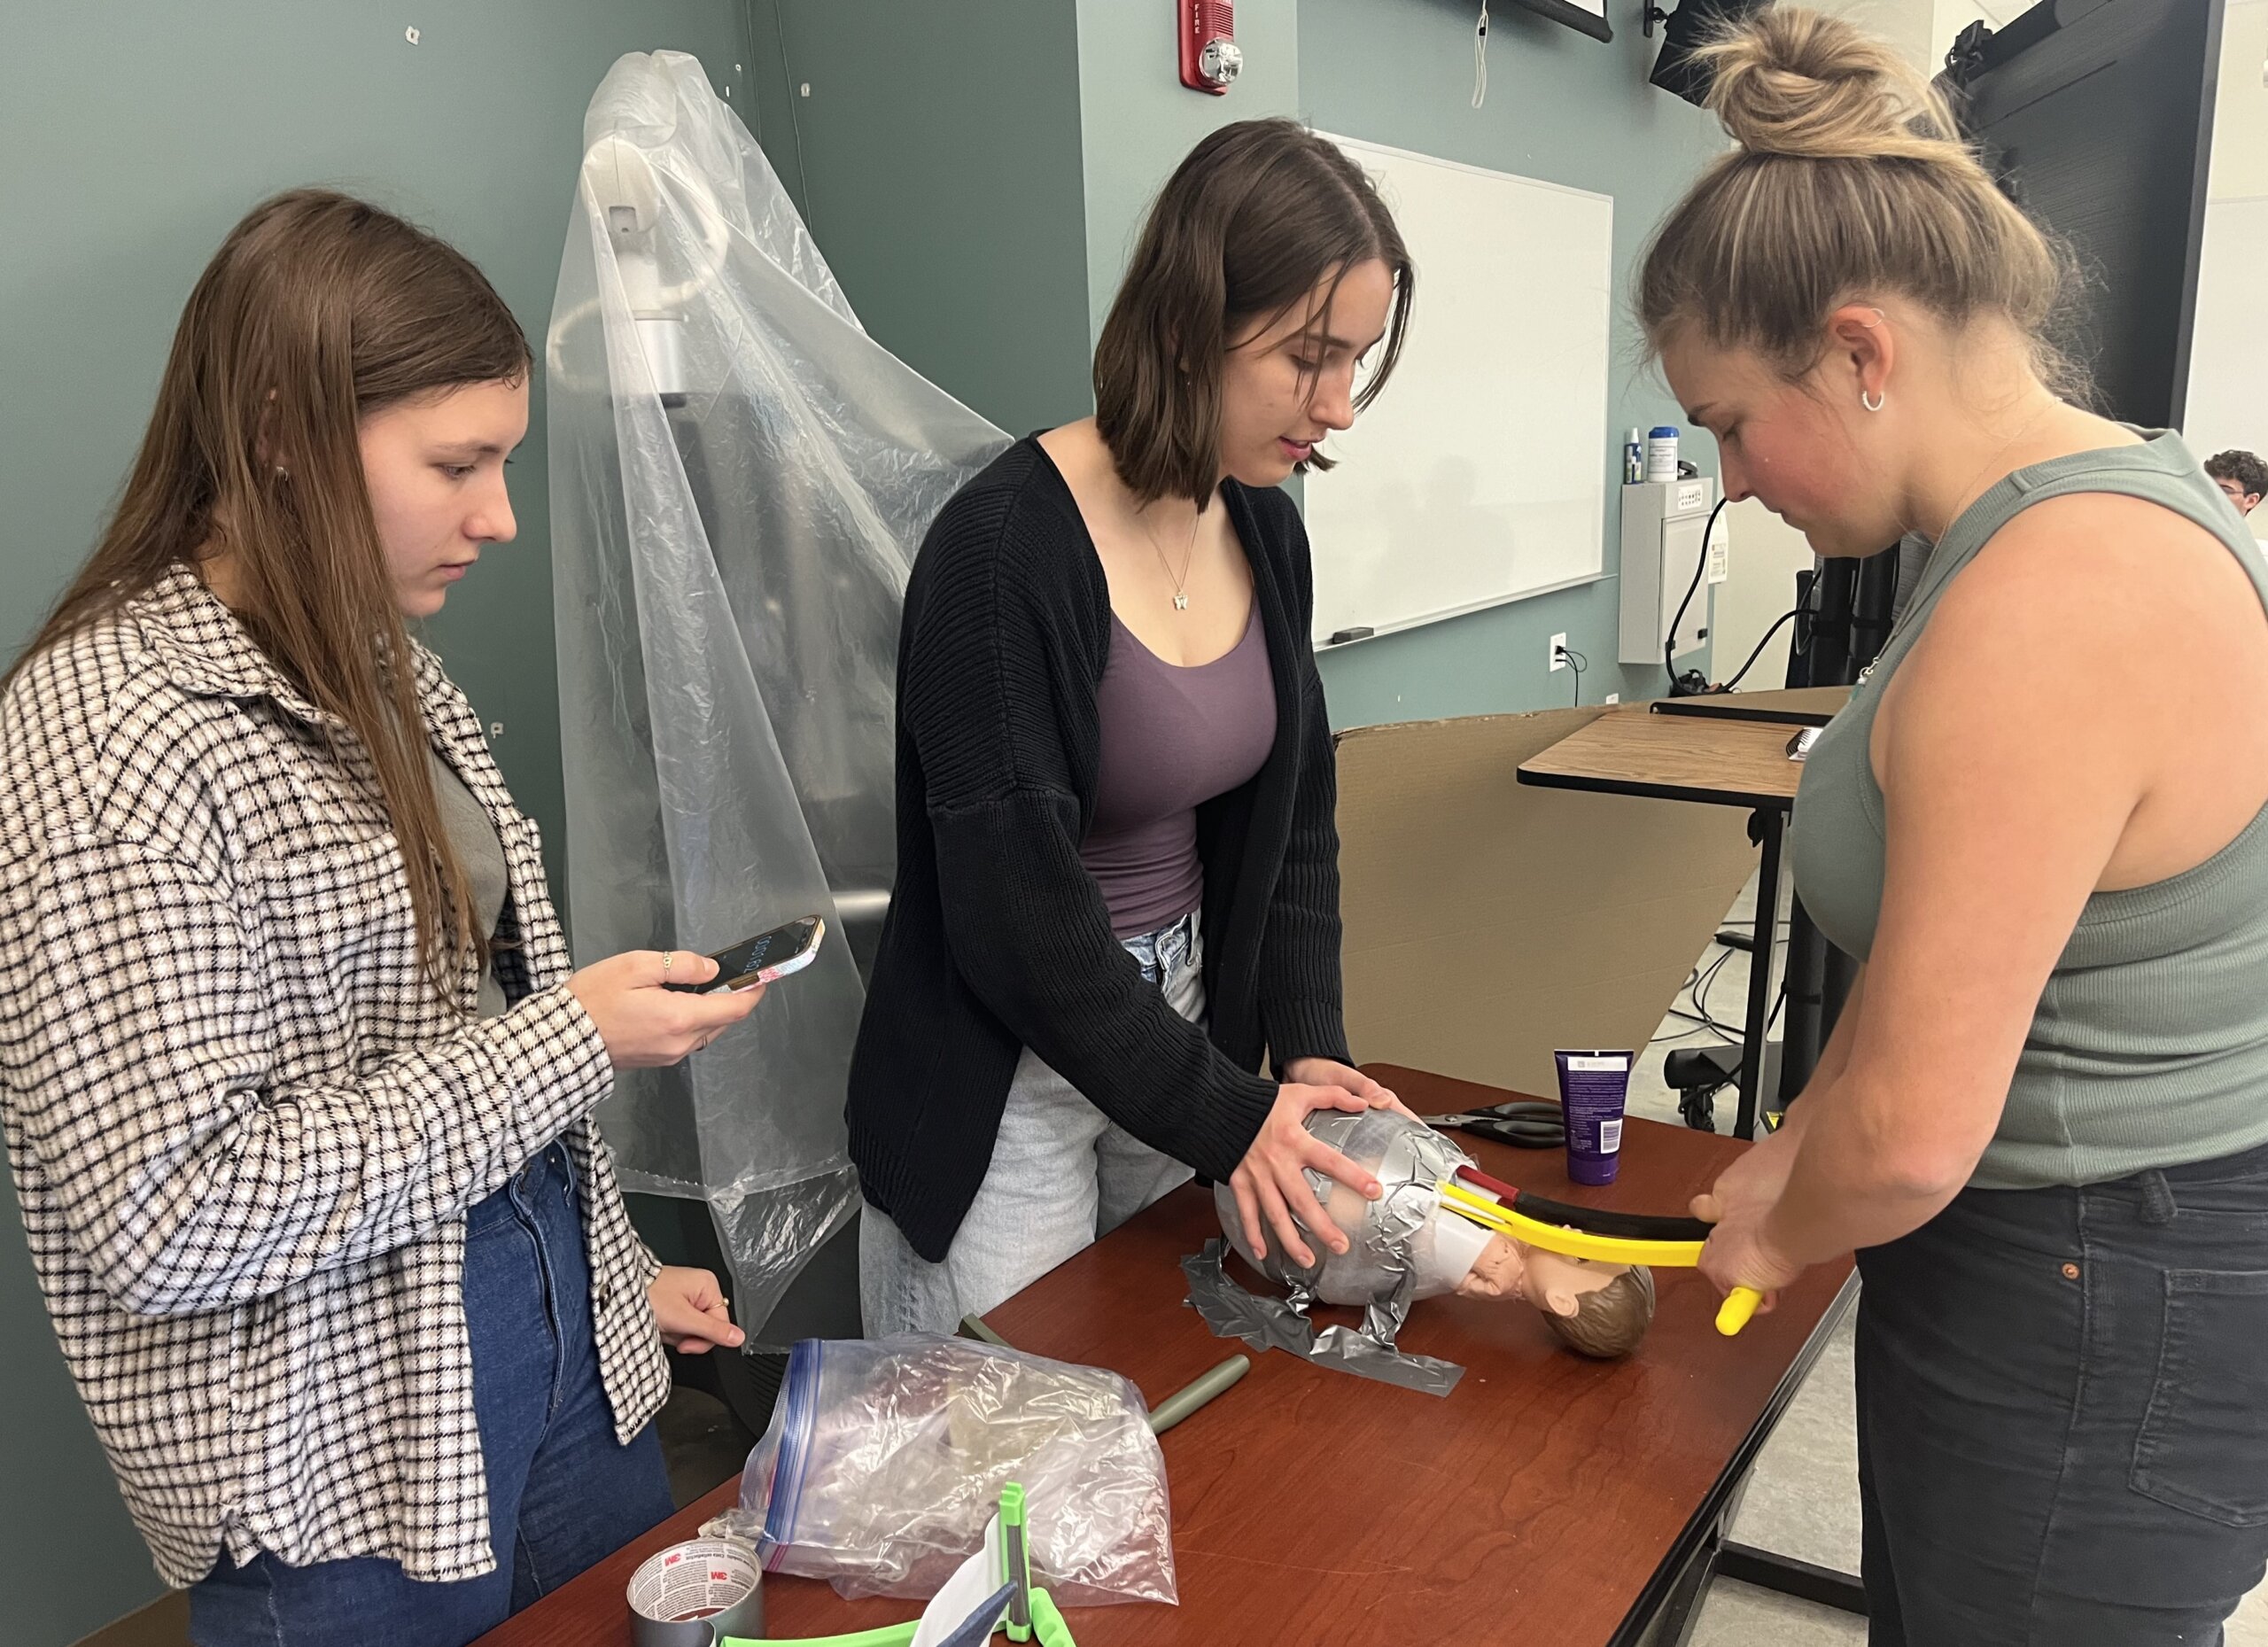 Three students simulate a delivery using a baby doll and giant plastic egg to test their assisted birth device